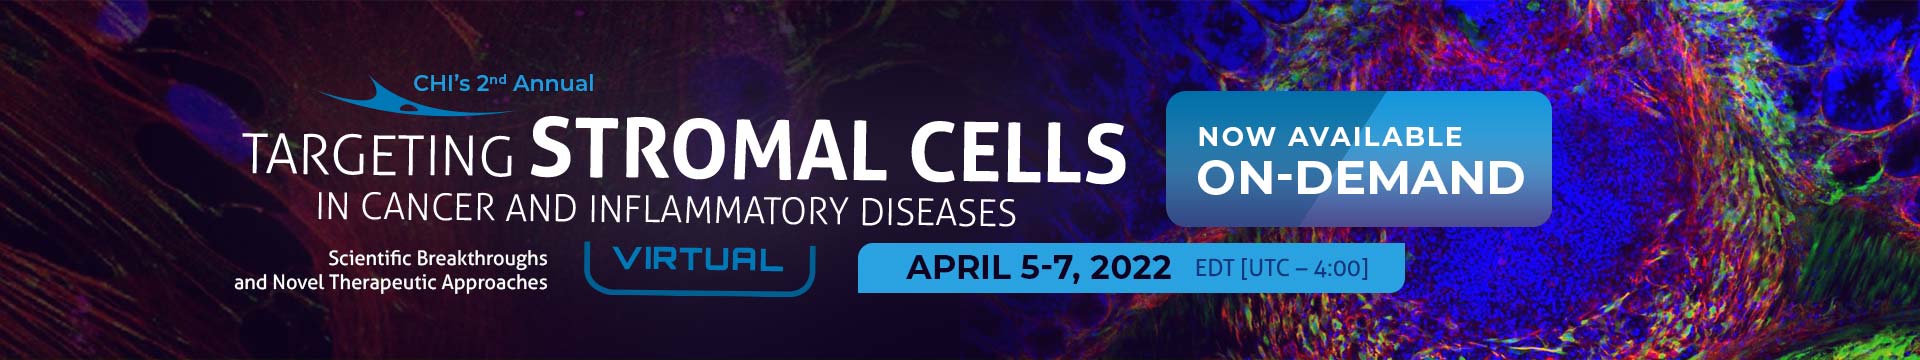 Targeting Stromal Cells in Cancer and Inflammatory Diseases Conference Banner Image